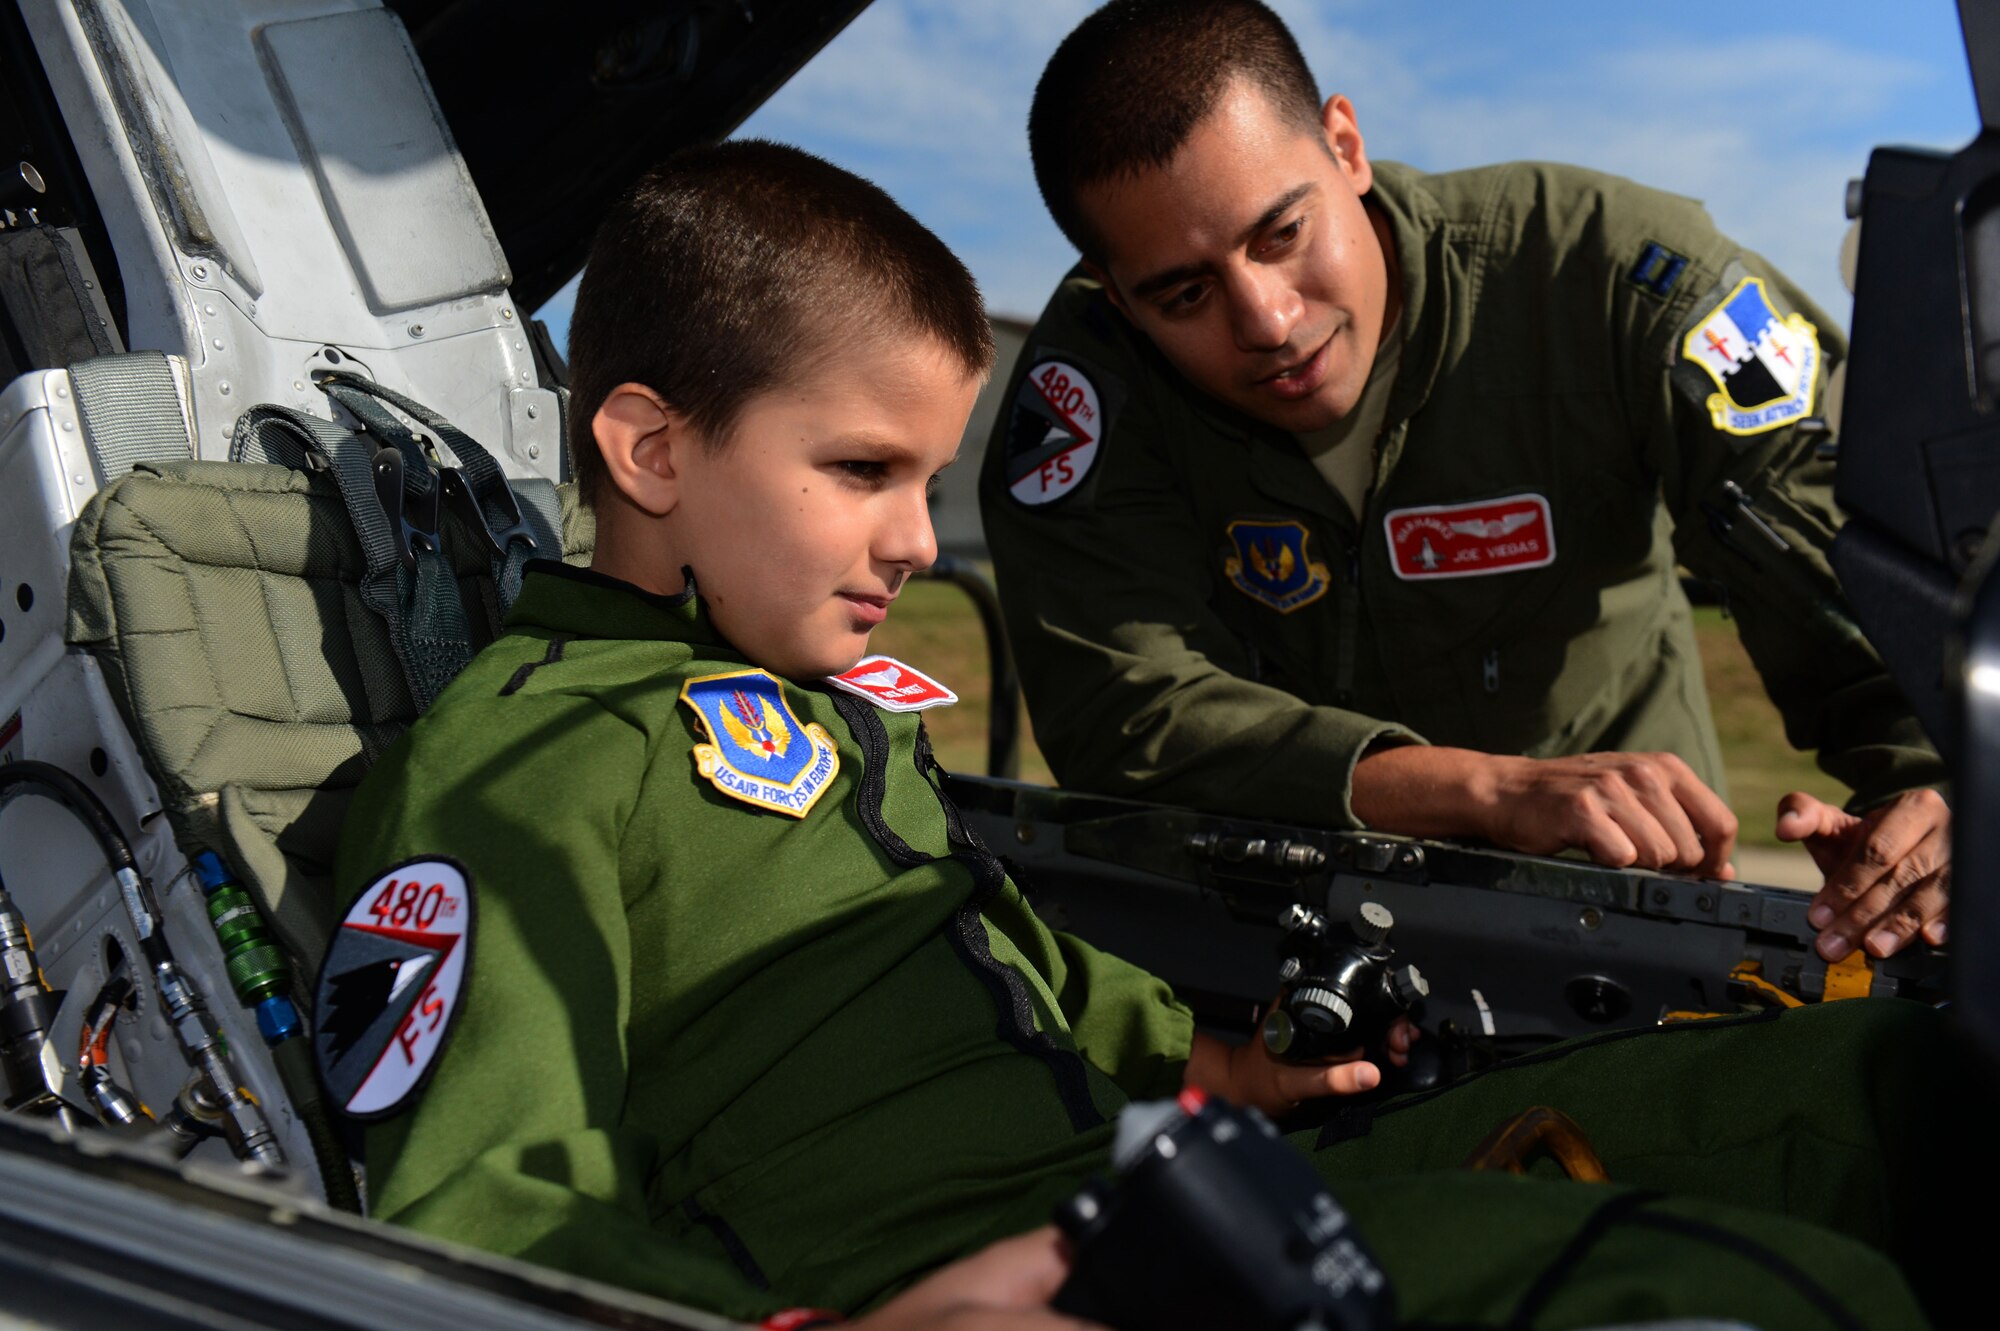 SPANGDAHLEM AIR BASE, Germany – U.S. Air Force Capt. Joseph Viegas, 480th Fighter Squadron pilot from Minneapolis, shows Stevie Frost, 9, the inside of an F-16 Fighting Falcon fighter Aircraft Aug. 16, 2013. Stevie spent 14 months in and out of a local German hospital undergoing chemotherapy and radiation treatments and is now 100 percent cancer free. (U.S. Air Force photo by Airman 1st Class Gustavo Castillo/Released) 